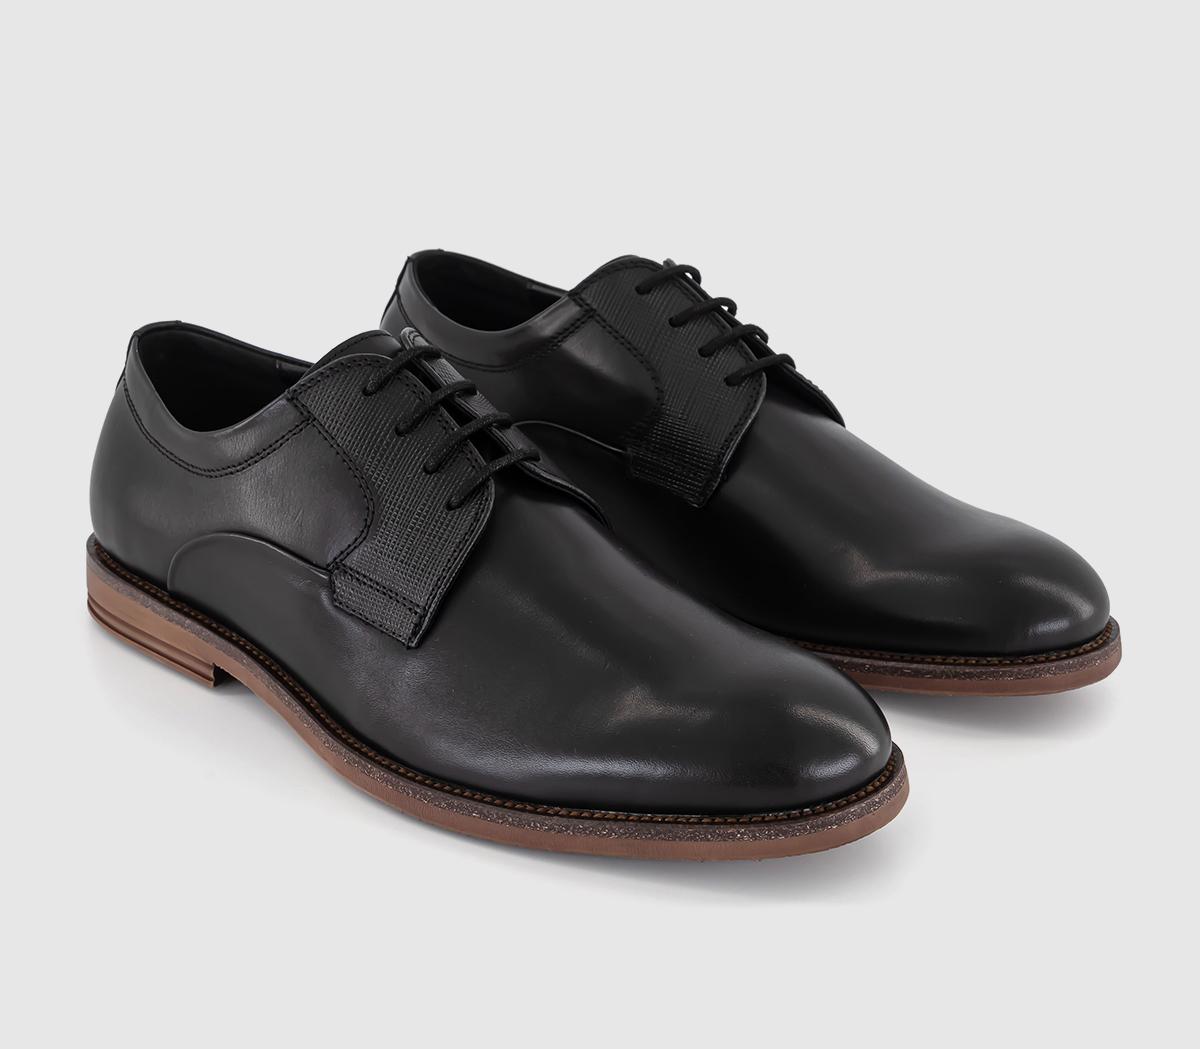 OFFICE Matteo Embossed Flexi Sole Derby Shoes Black Leather, 7